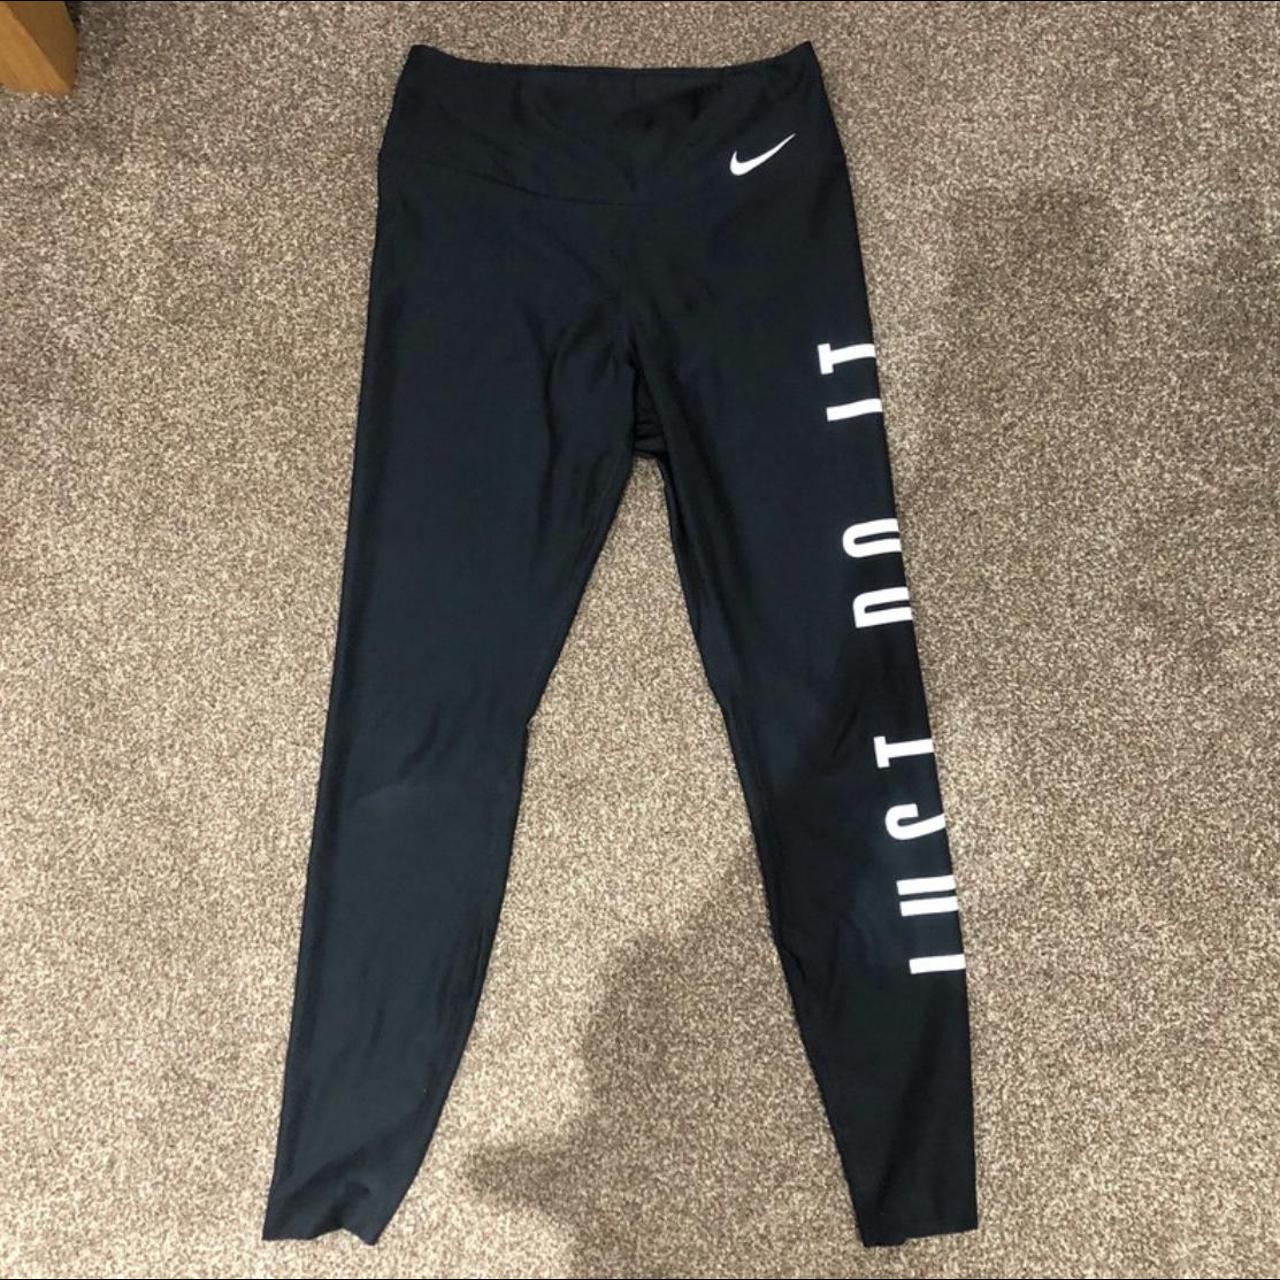 Nike black and white dri fit leggings tights for gym - Depop